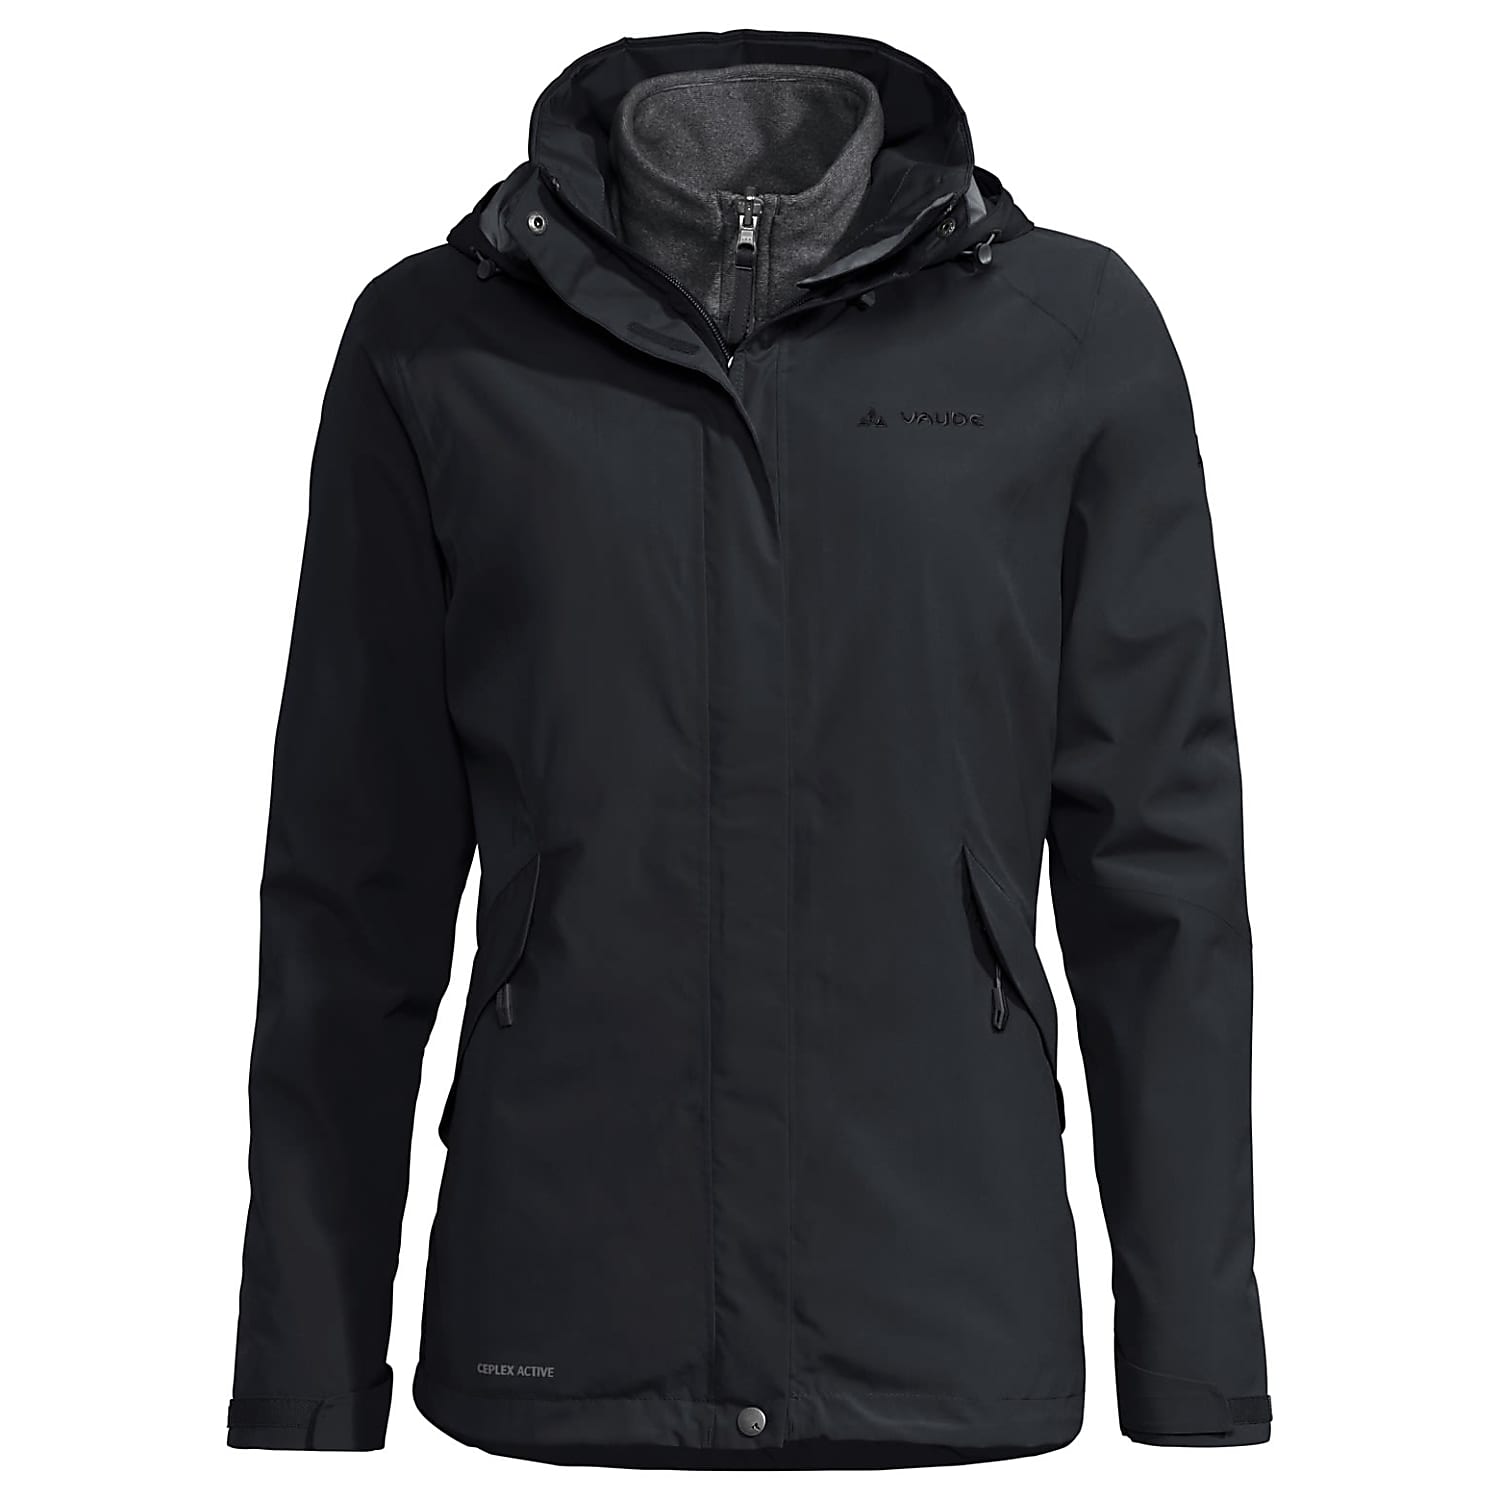 JACKET, and Fast shipping 3IN1 ROSEMOOR cheap - Black WOMENS Vaude